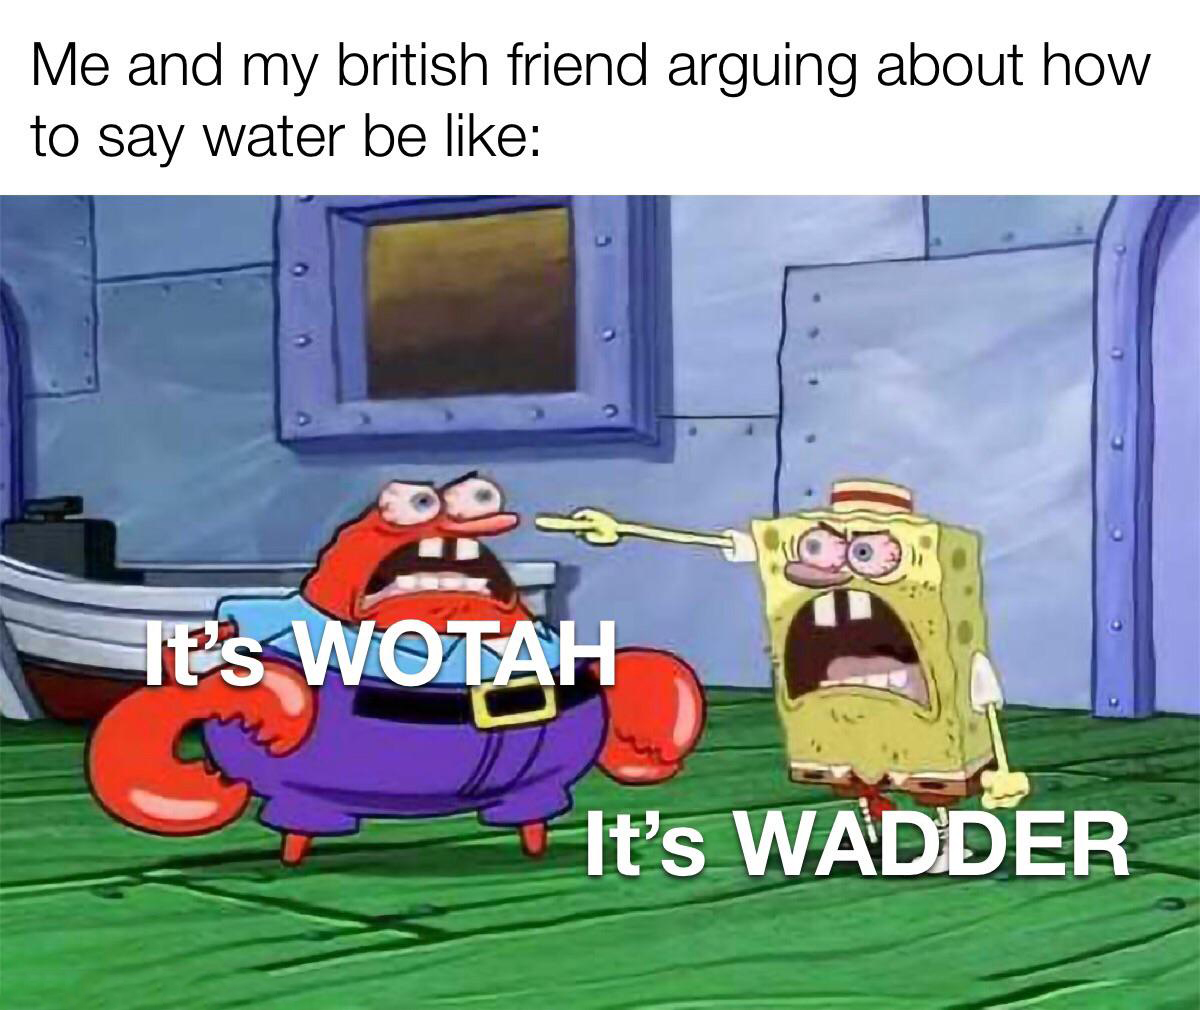 spunch bob meme - Me and my british friend arguing about how to say water be Ies Wotah It's Wadder